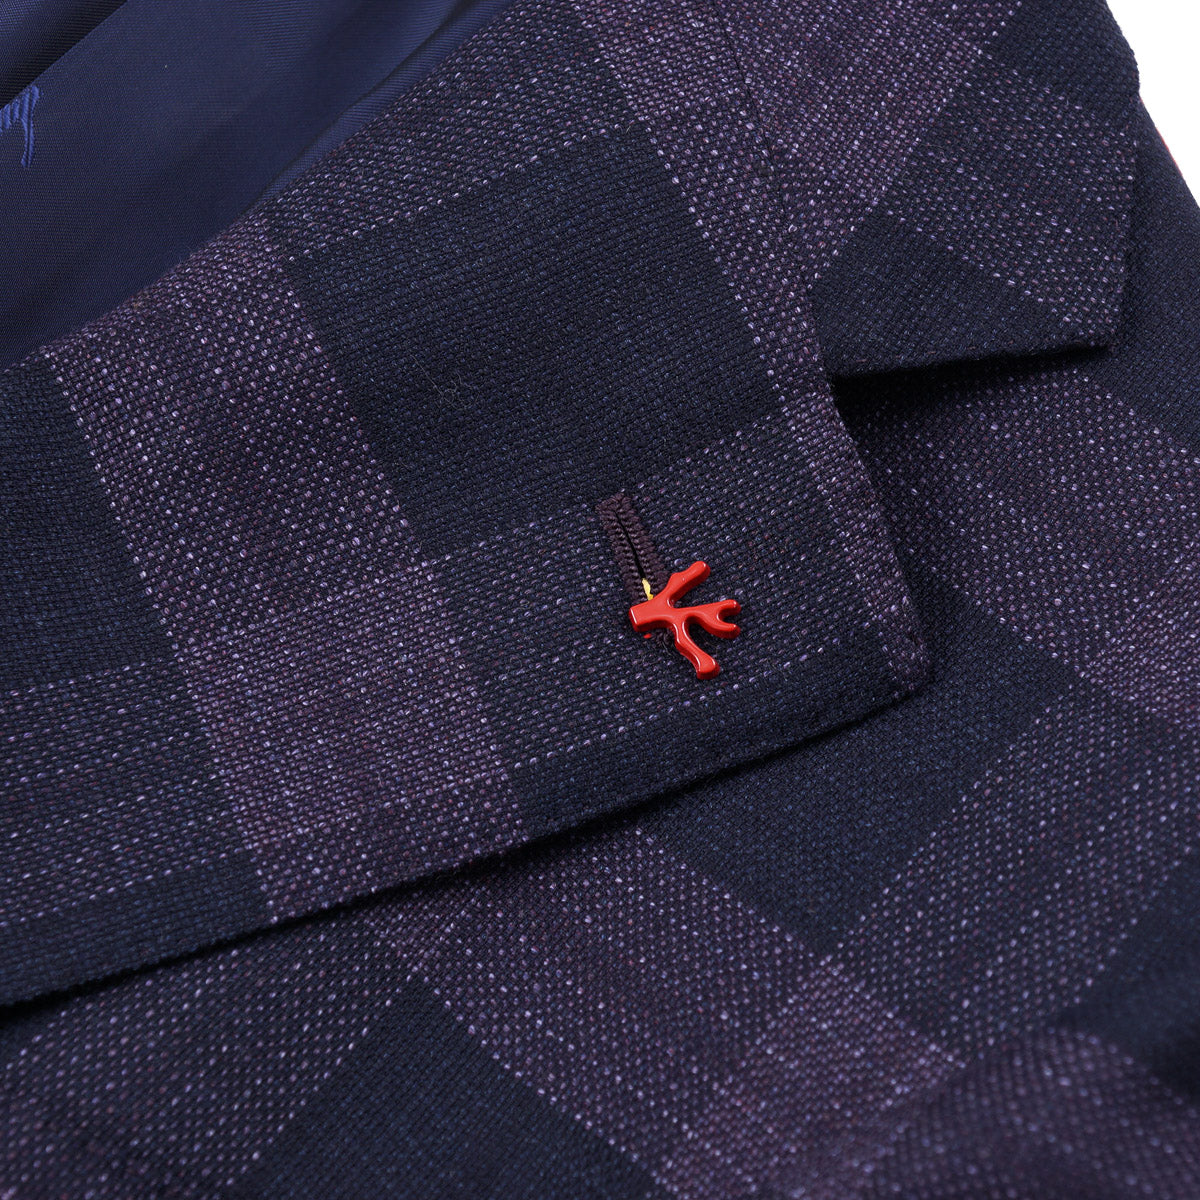 Isaia Woven Wool and Silk Sport Coat - Top Shelf Apparel